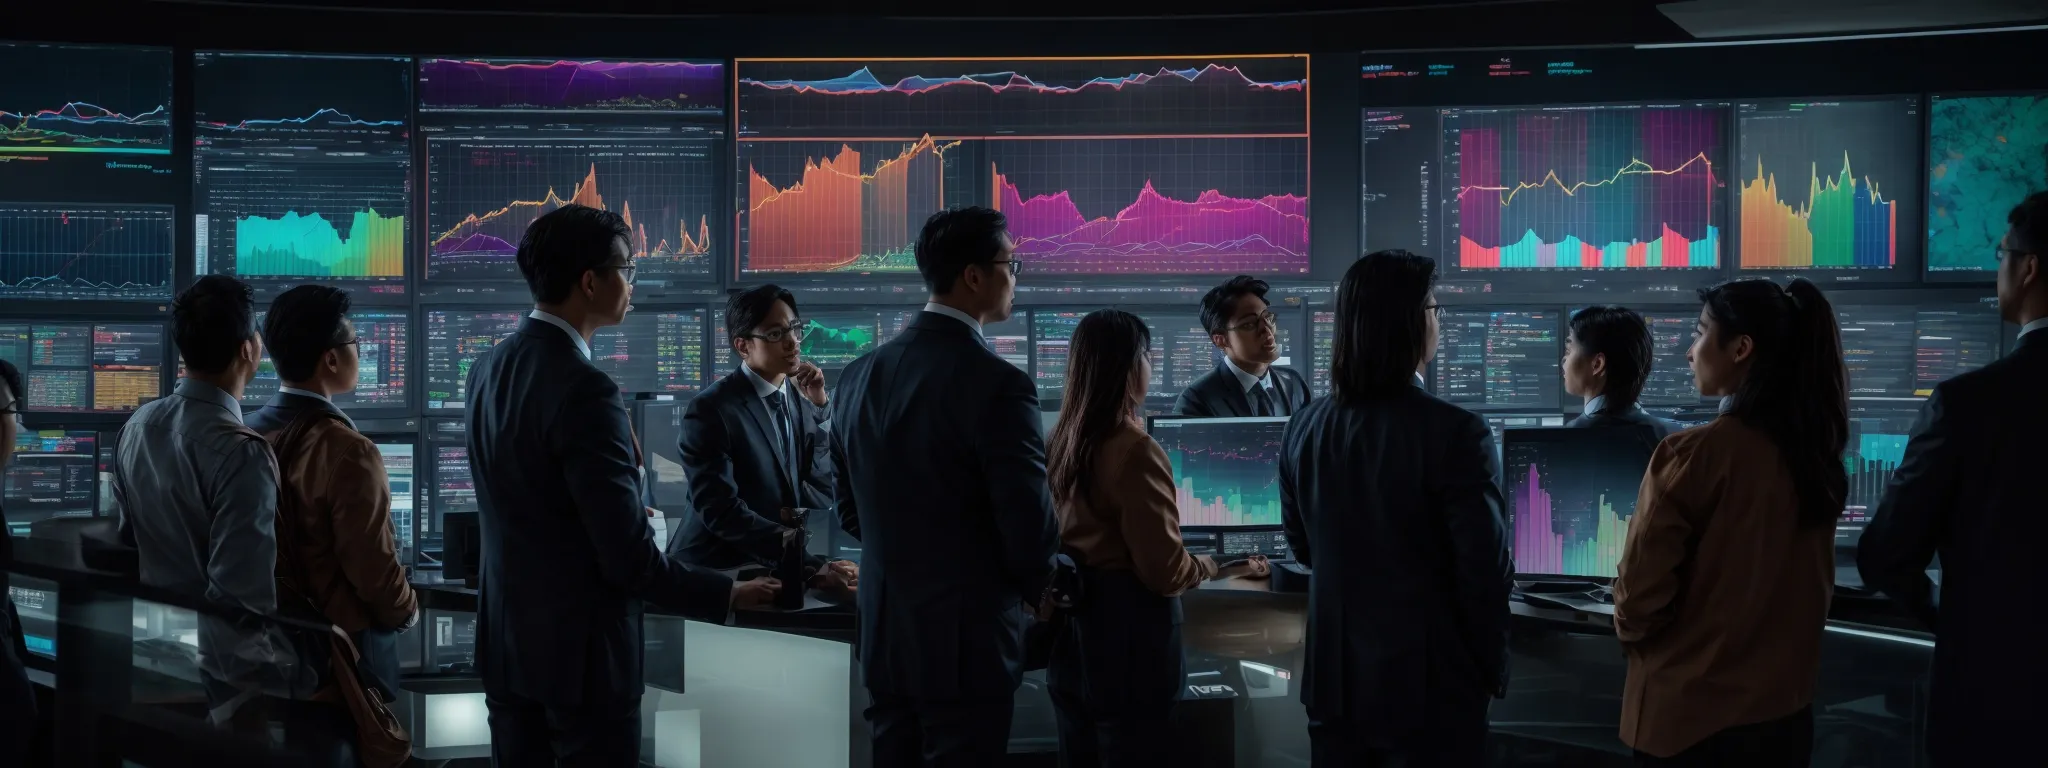 a diverse group of marketing professionals gathers around a large, glowing computer screen displaying colorful graphs and data analytics.